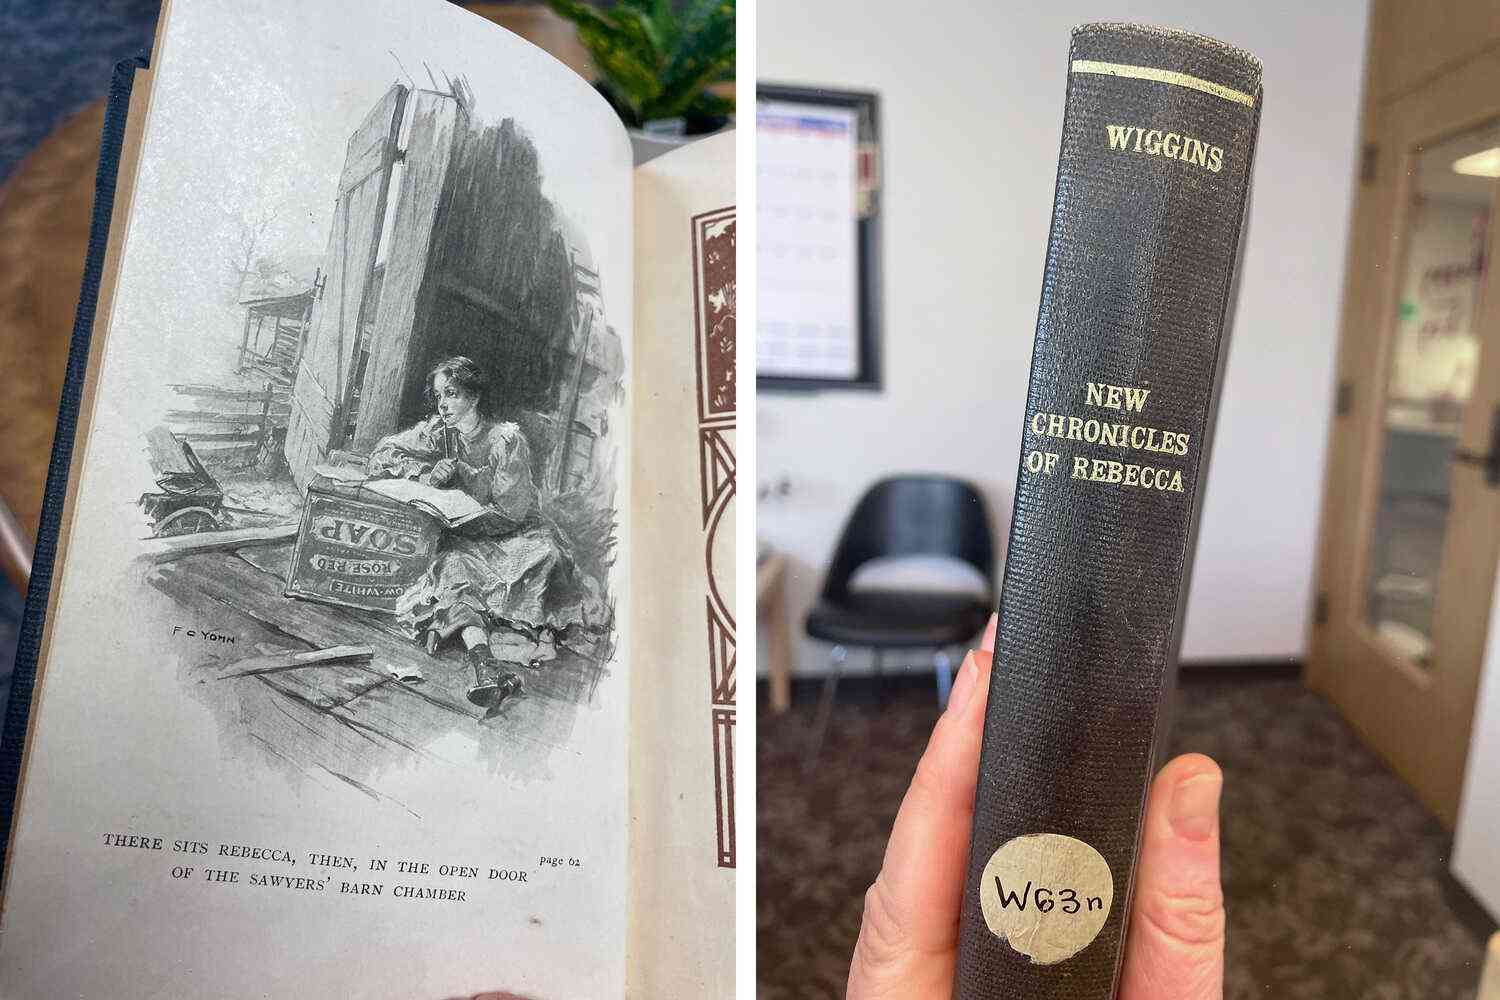 When a small library got its copy of a lost children's book back